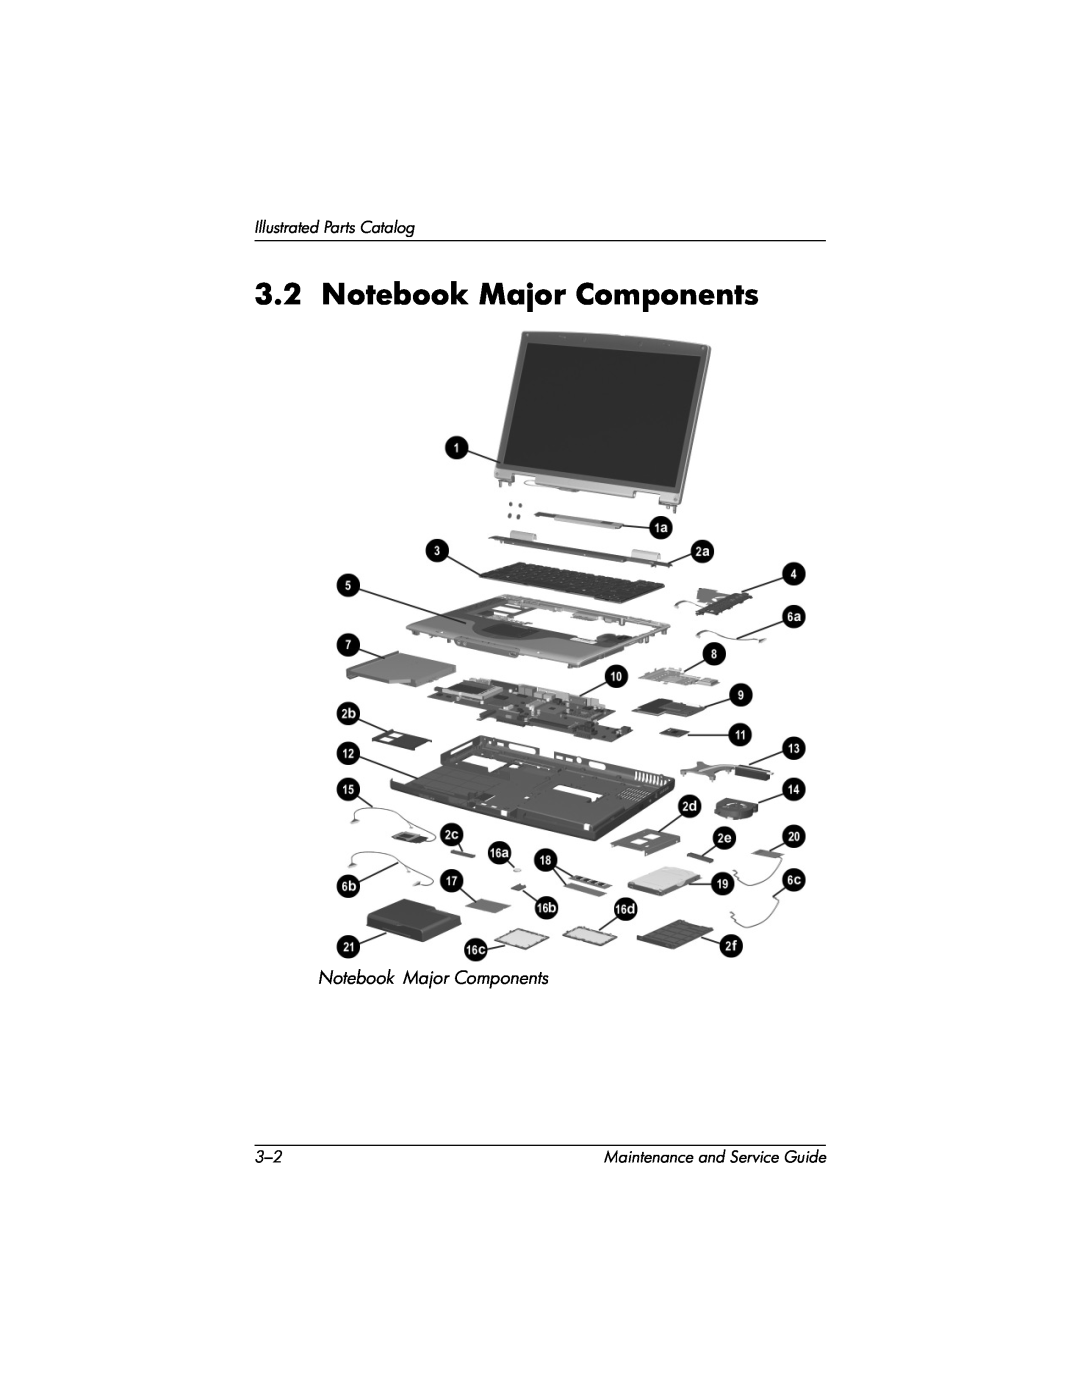 HP X1055AP, X1027AP, X1026AP, X1023AP Notebook Major Components, Illustrated Parts Catalog, Maintenance and Service Guide 